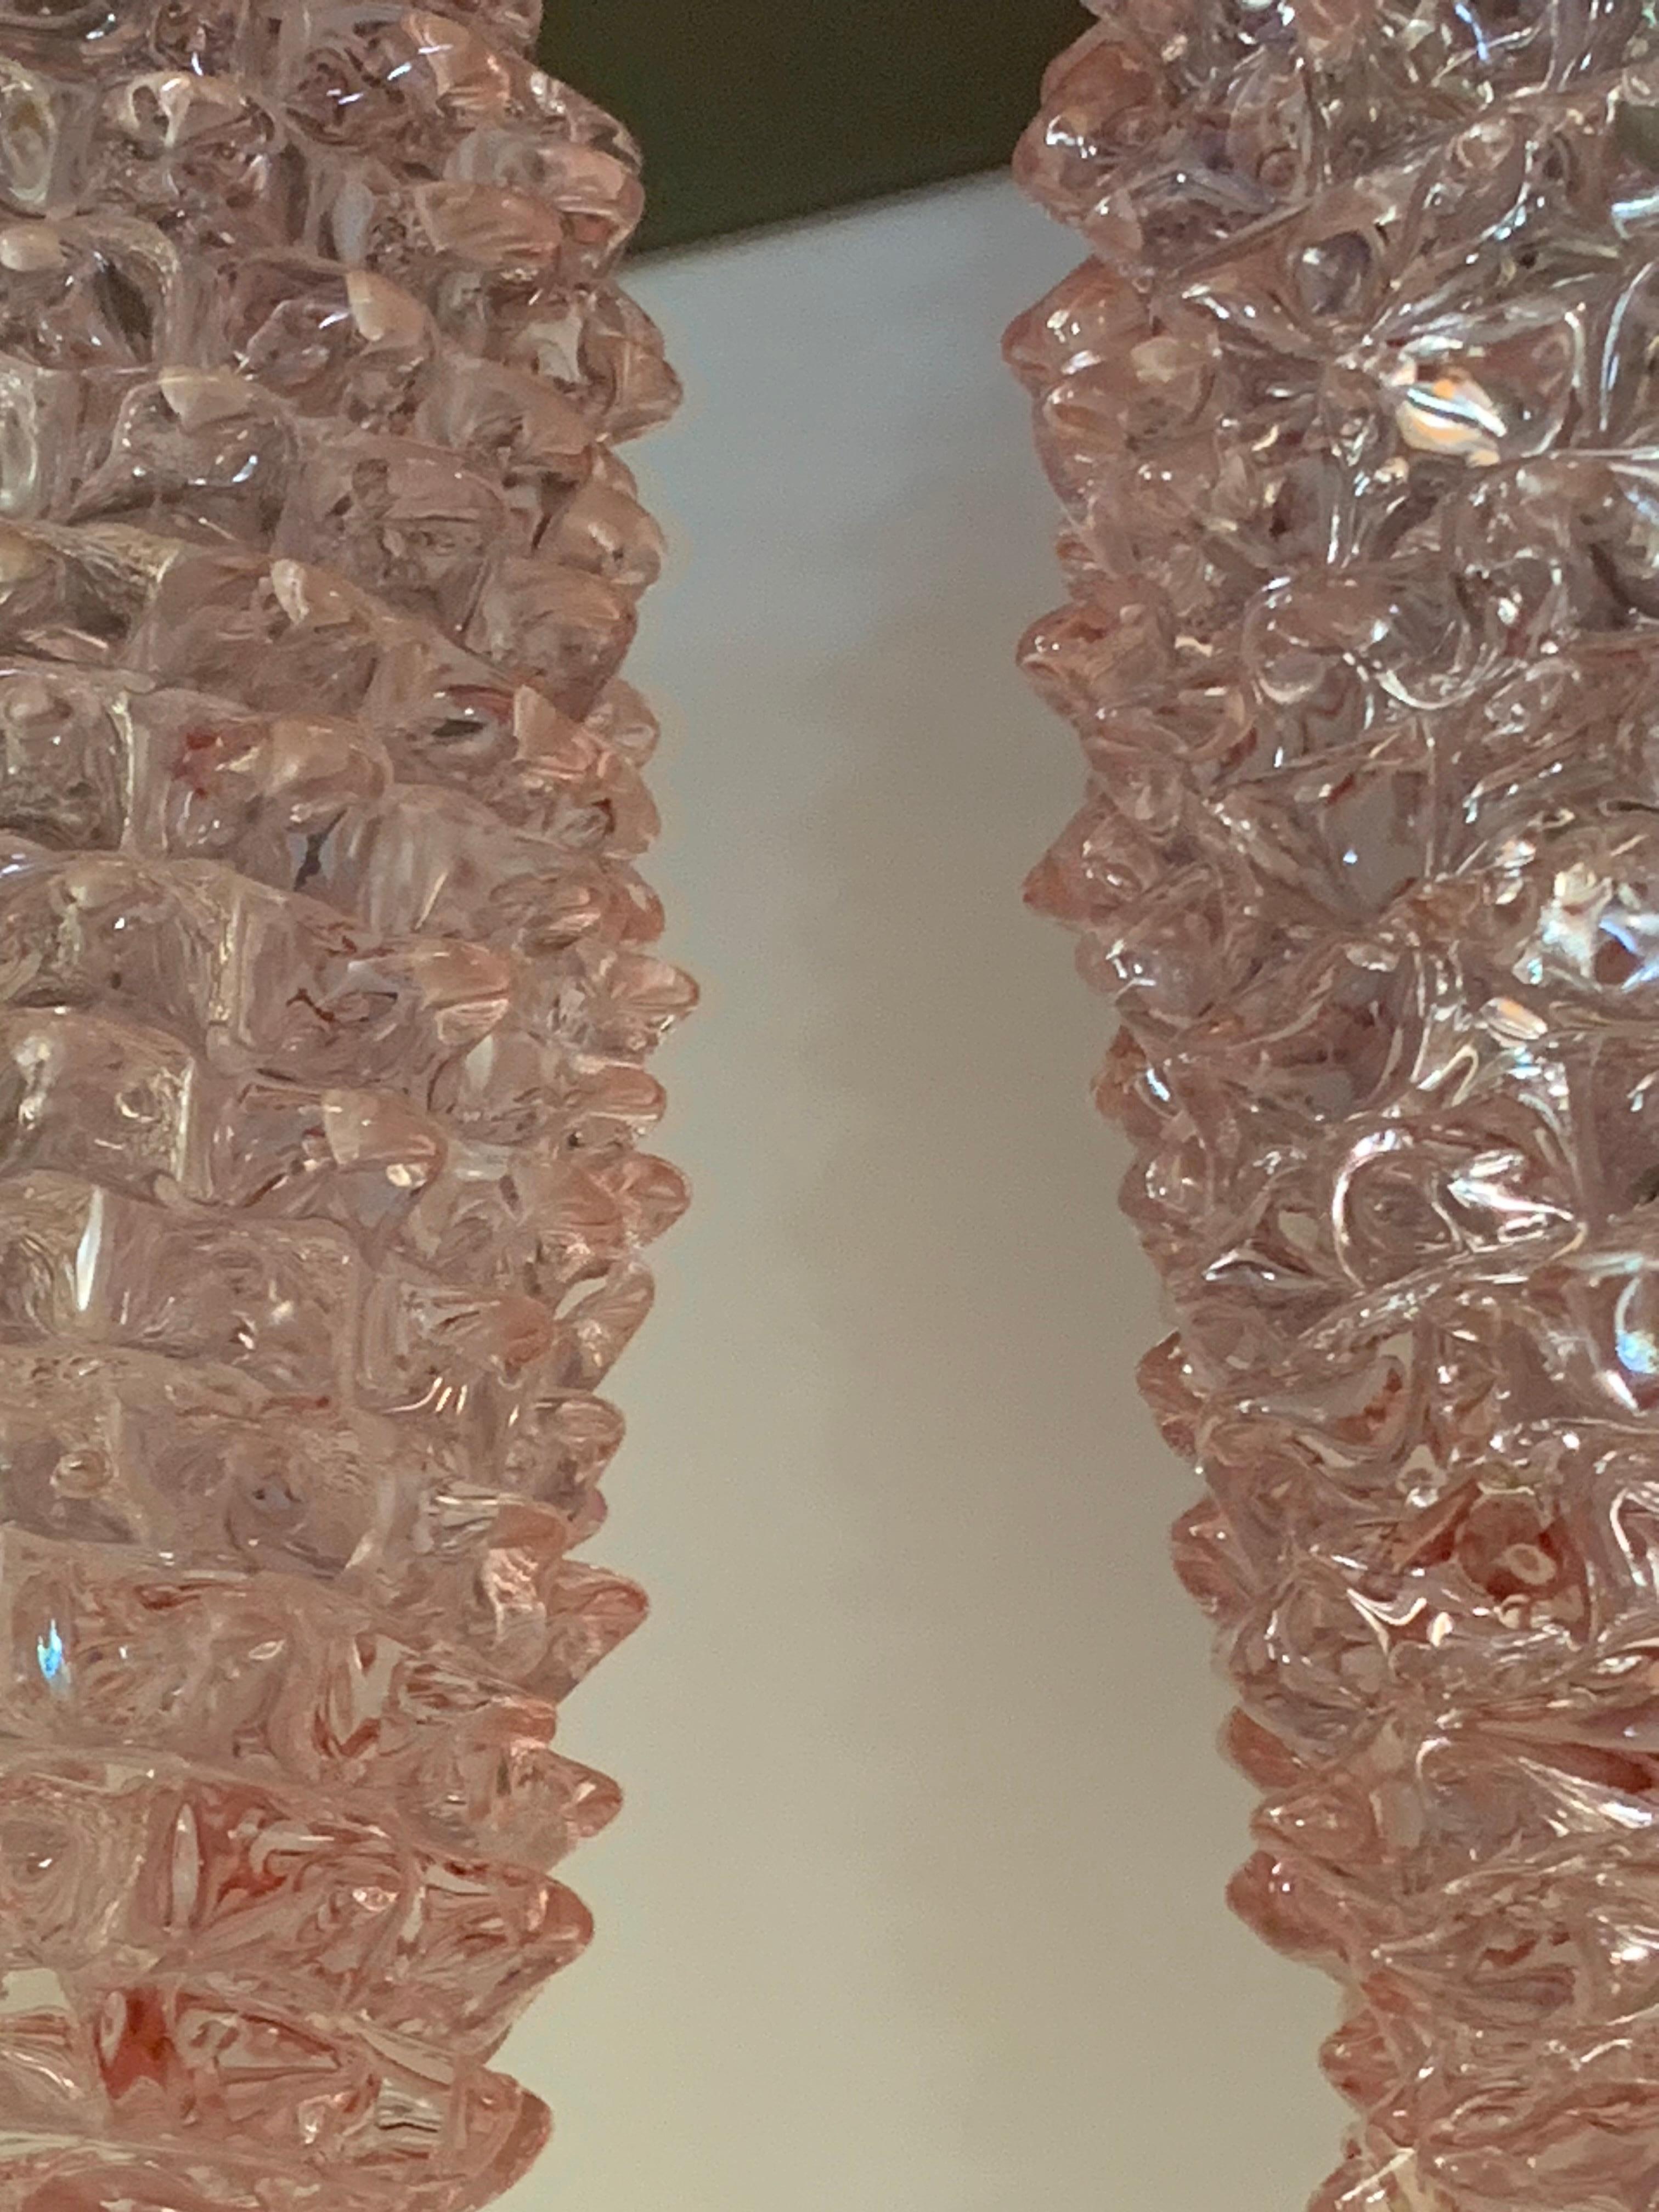 Pair of Tall Pink Vases in Murano Glass with Spikes Decor, Barovier Style 11